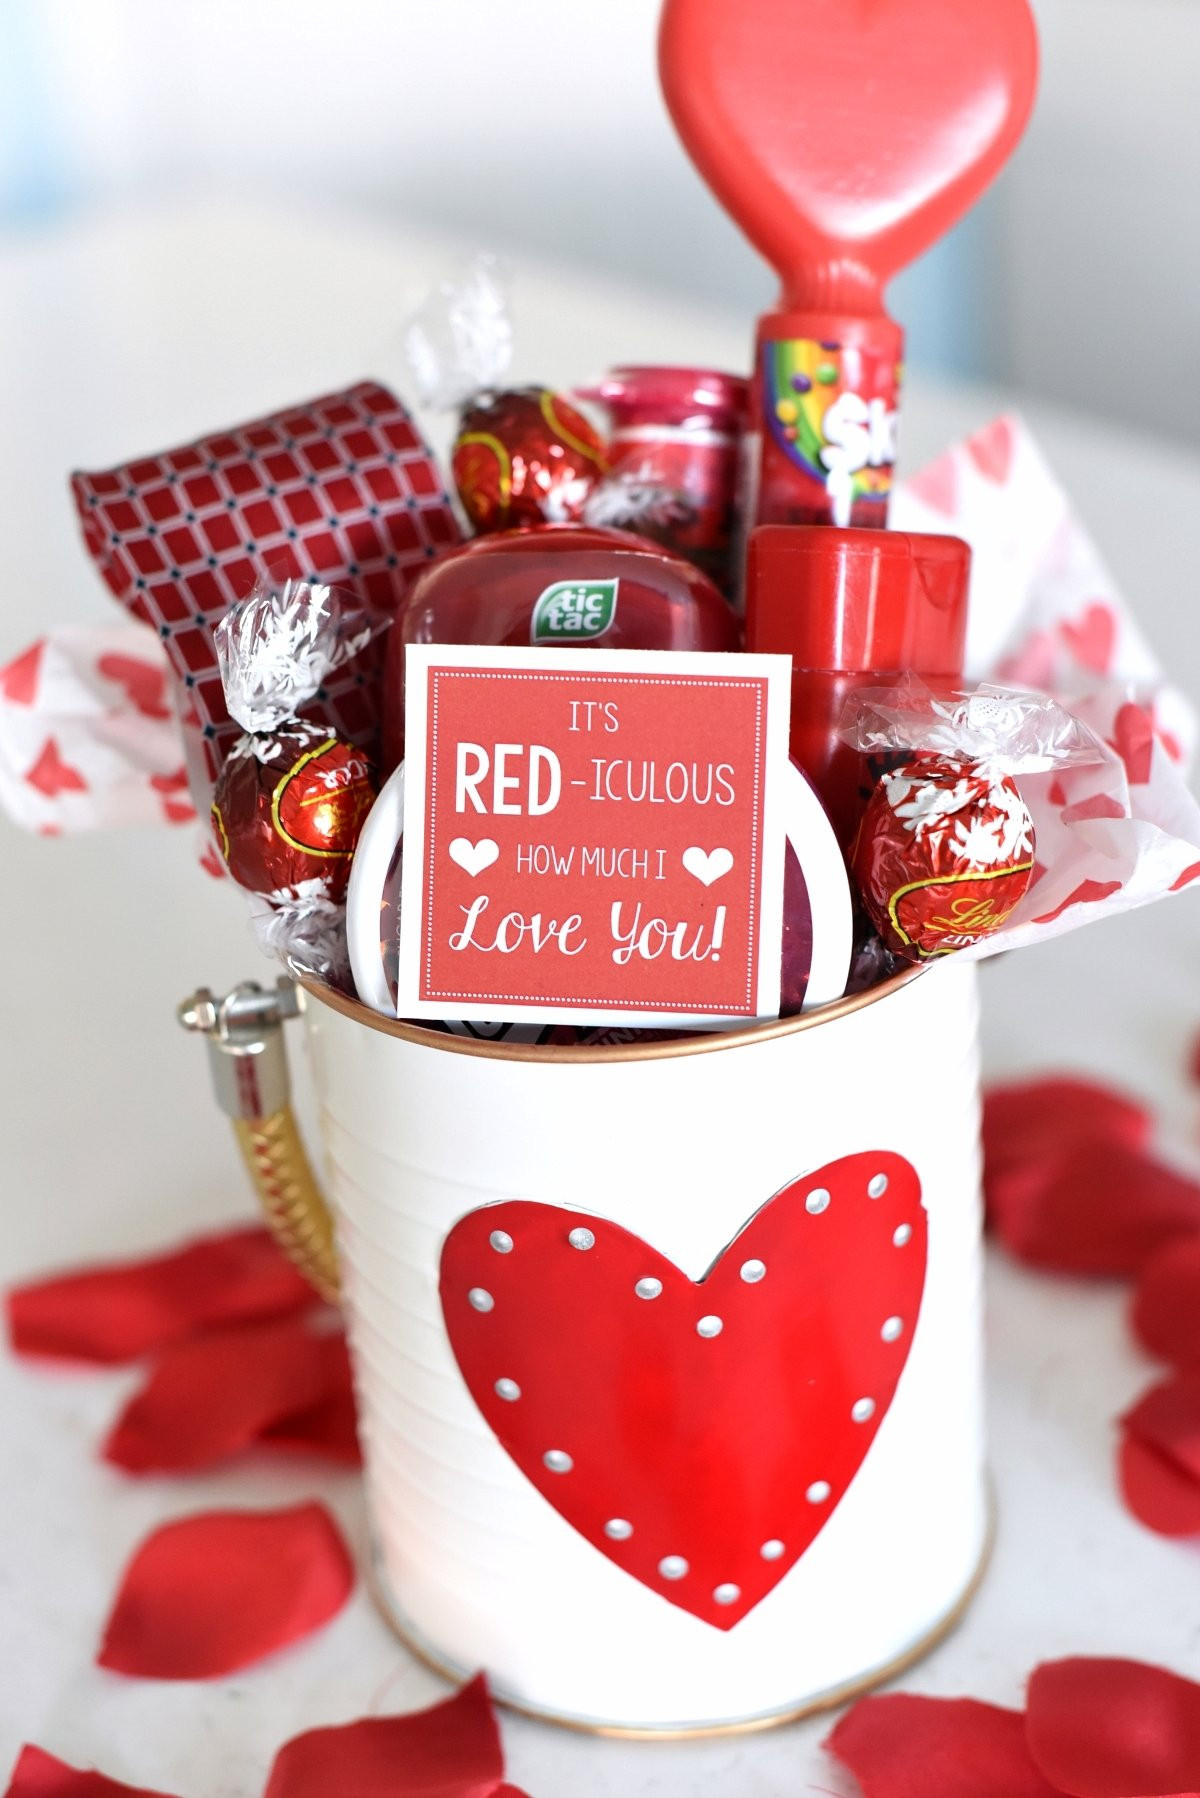 Cool Valentines Day Gift Ideas
 10 Elegant Valentines Day Gift Ideas For Wife 2020